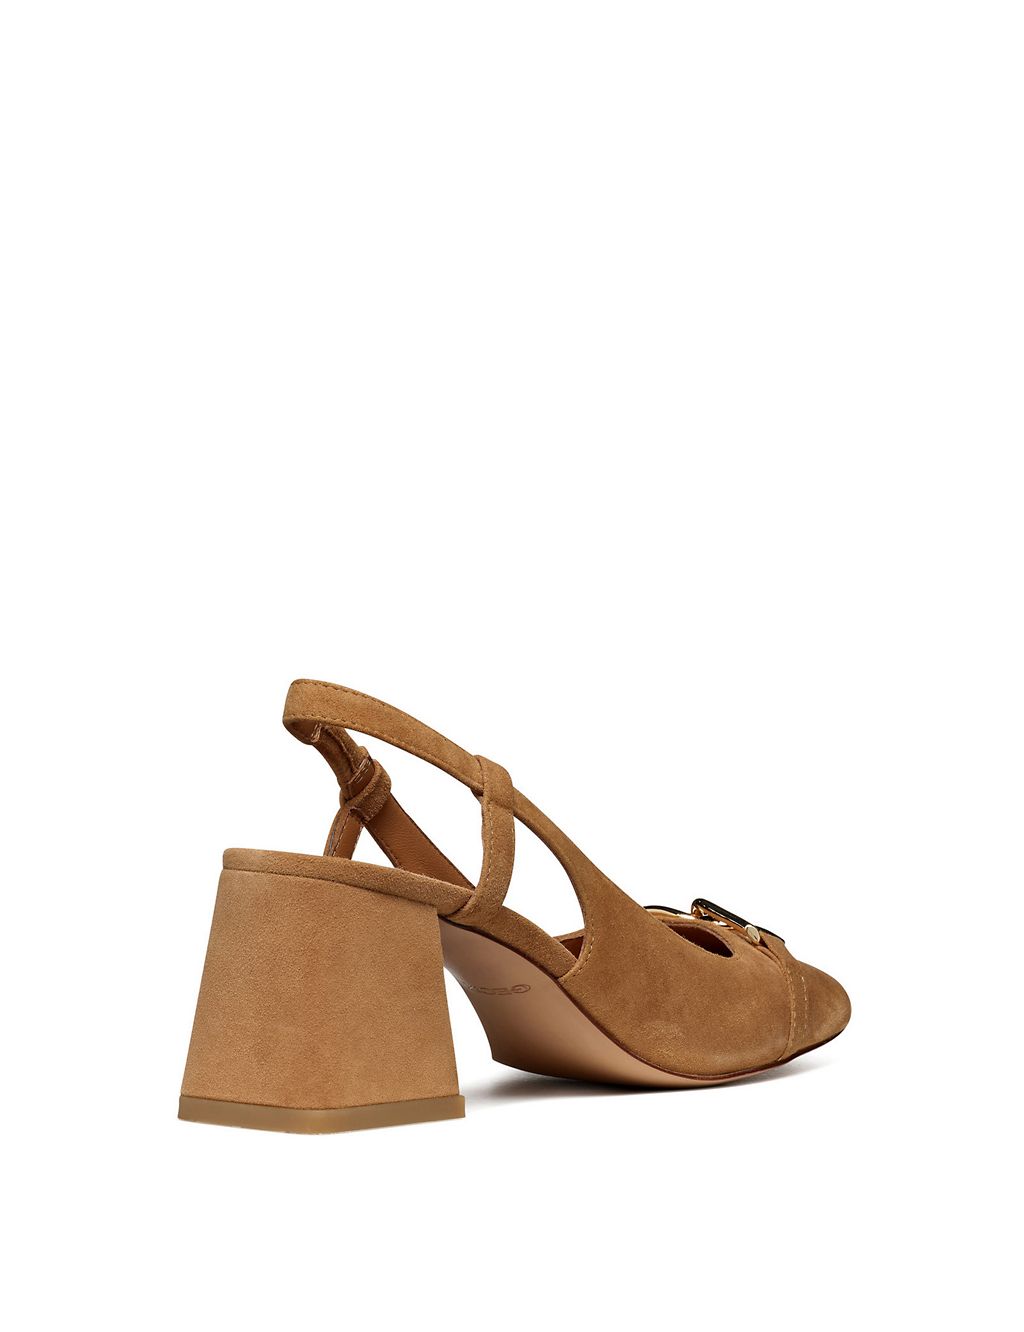 Suede Block Heel Square Toe Slingback Shoes 4 of 6